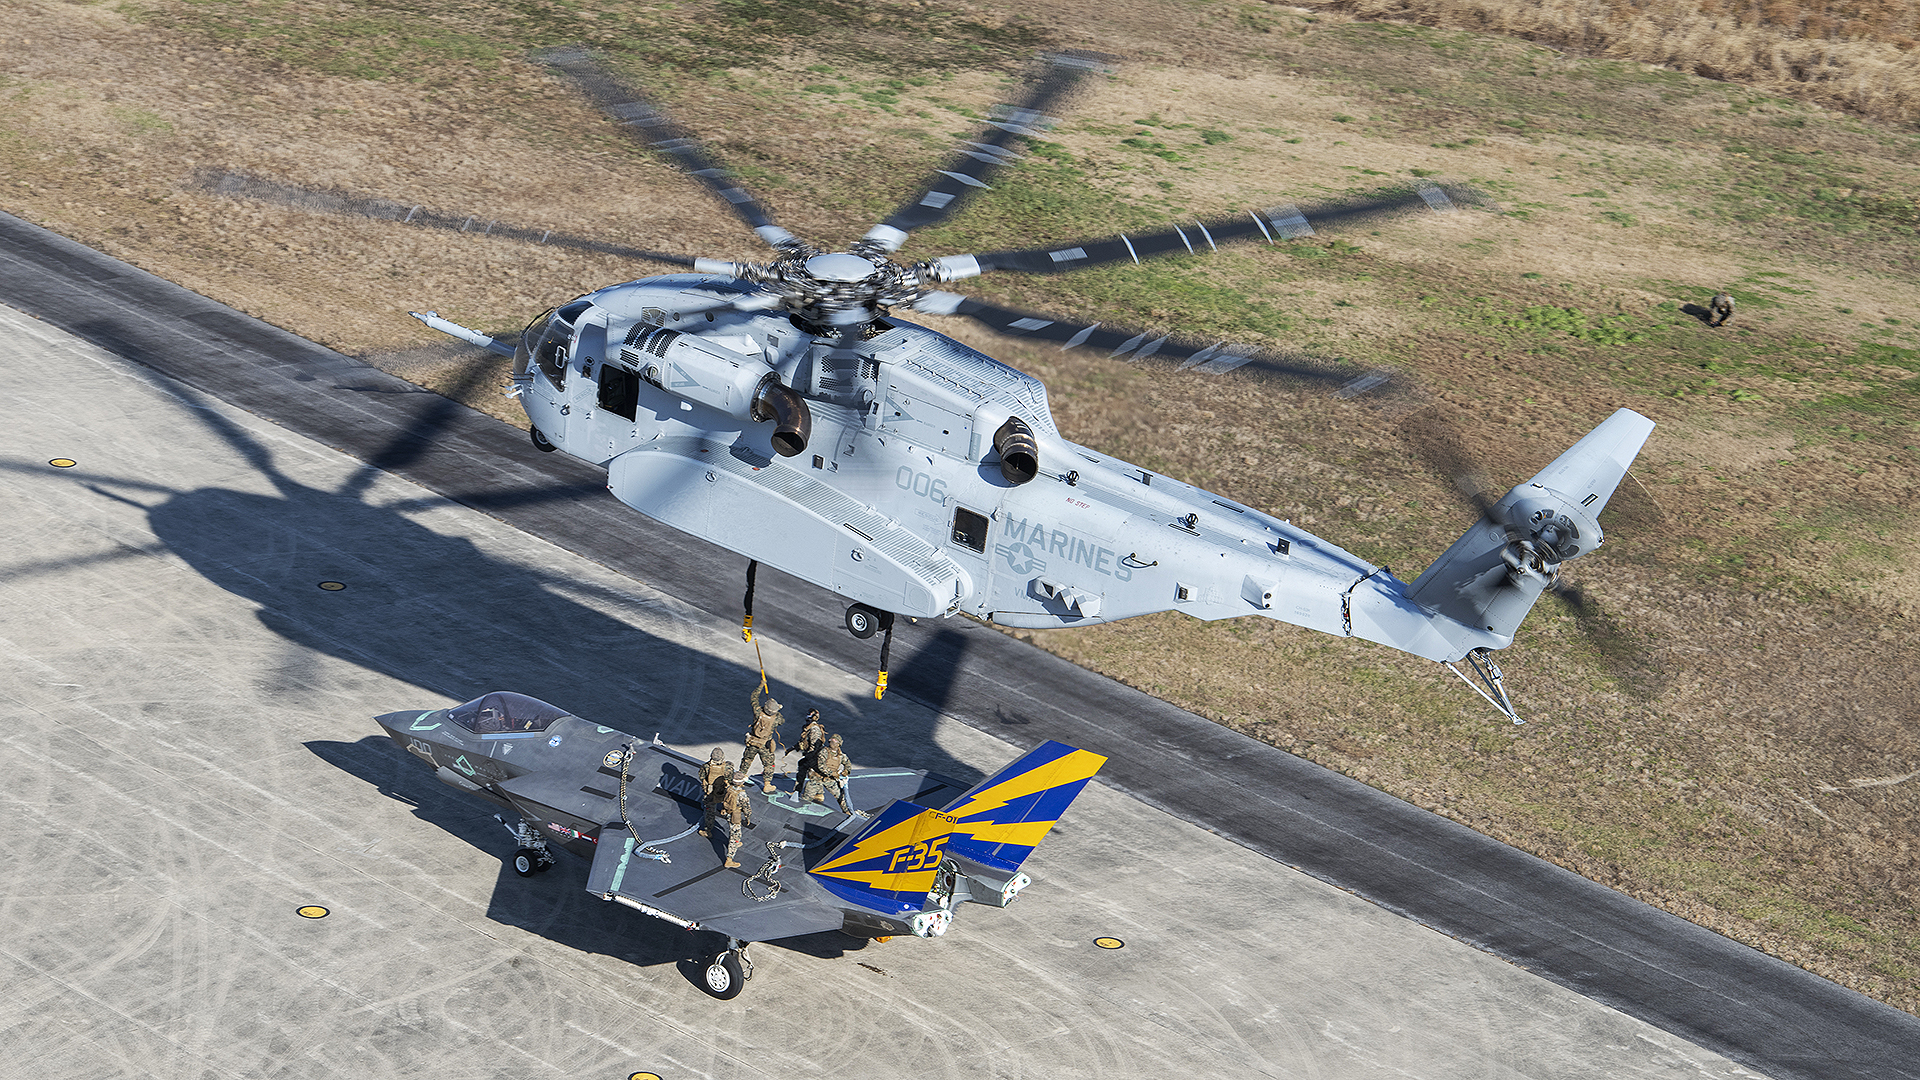 CF-1 lift with VMX-1 CH-53K